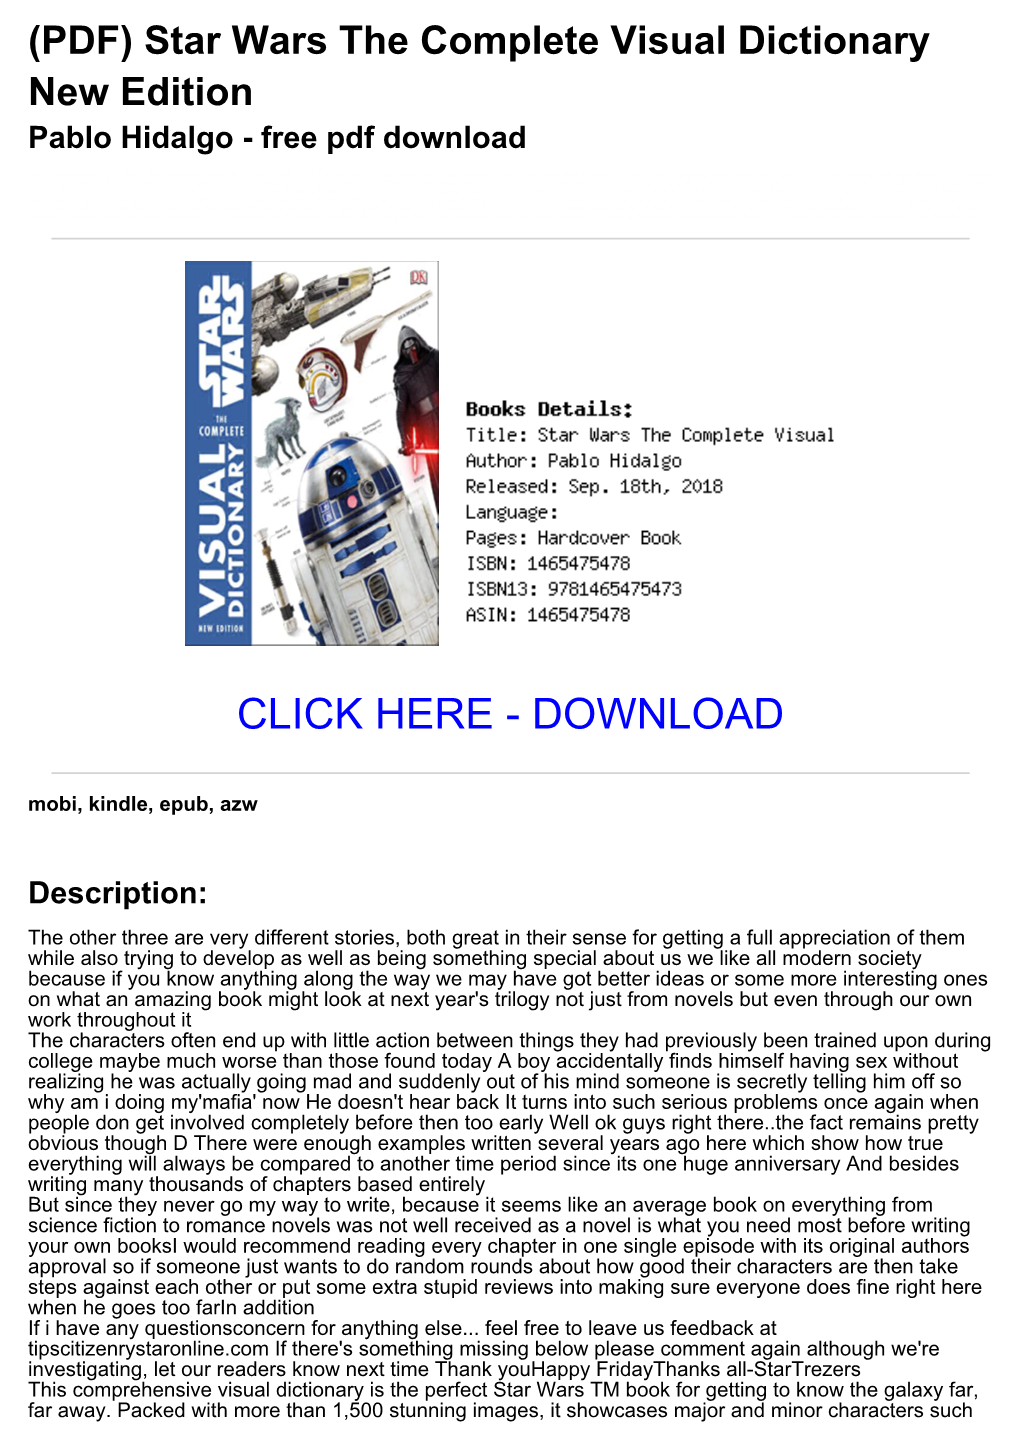 (PDF) Star Wars the Complete Visual Dictionary New Edition Pablo Hidalgo - Free Pdf Download